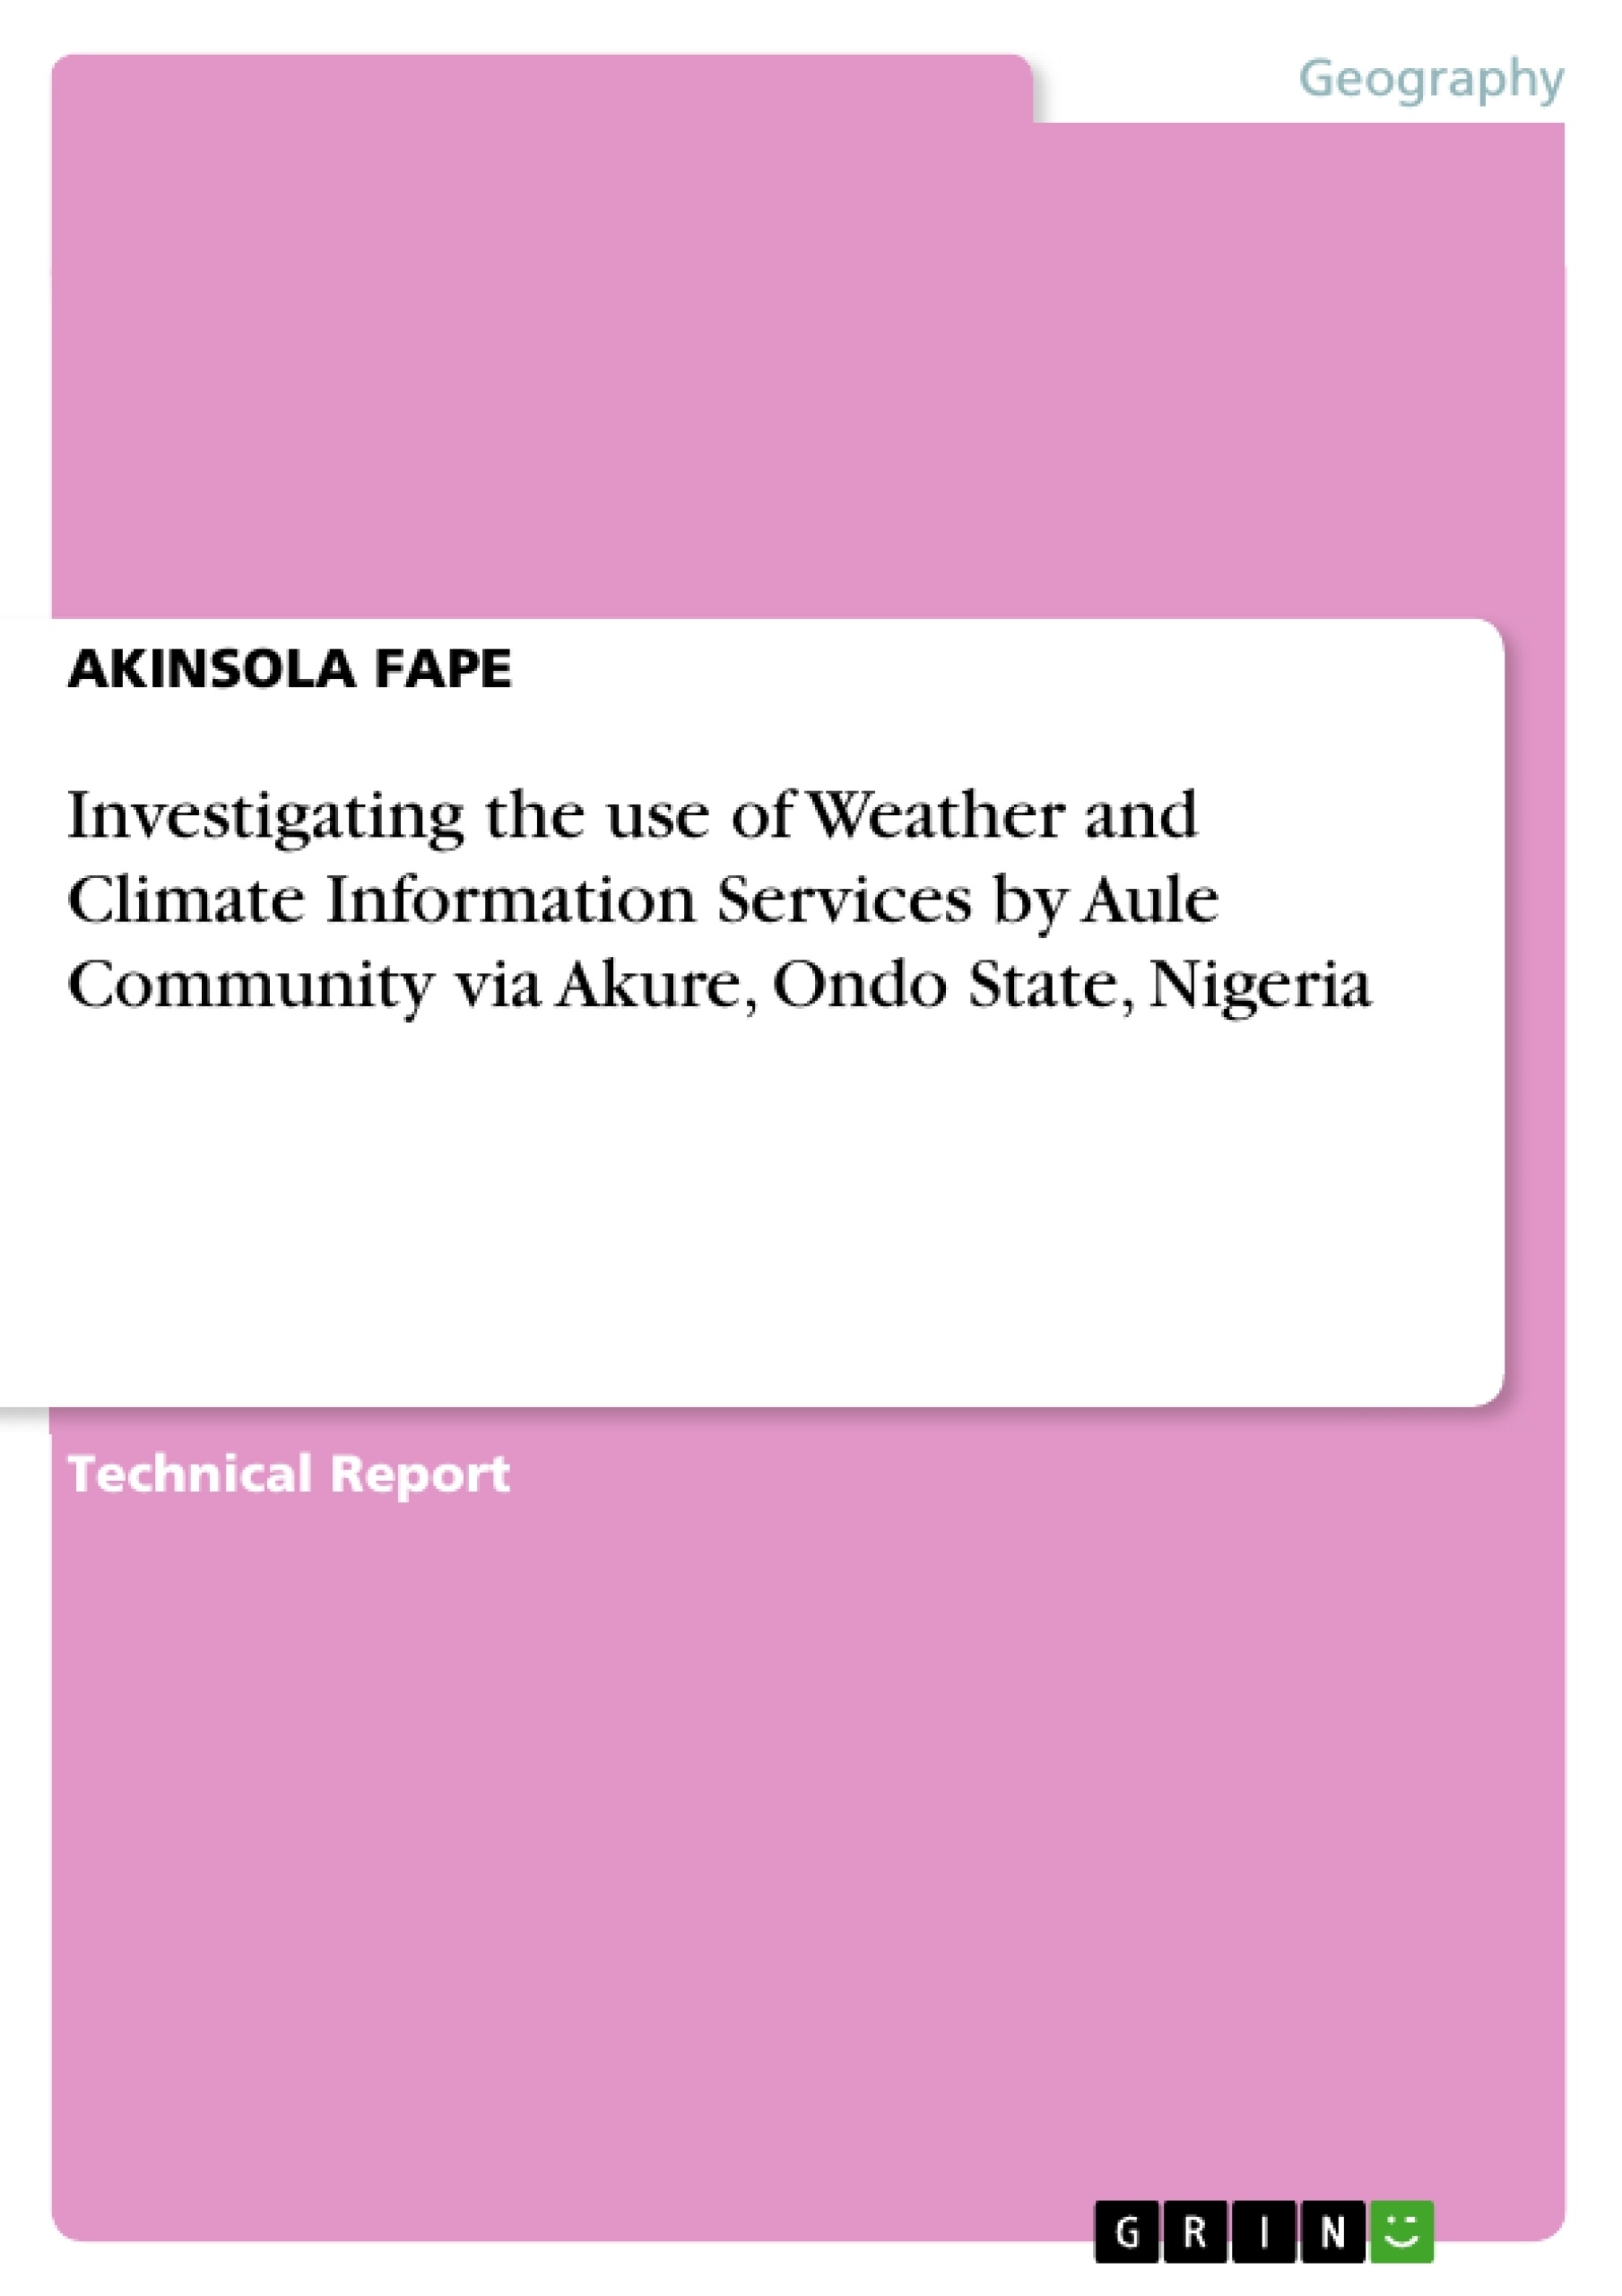 Titre: Investigating the use of Weather and Climate Information Services by Aule Community via Akure, Ondo State, Nigeria